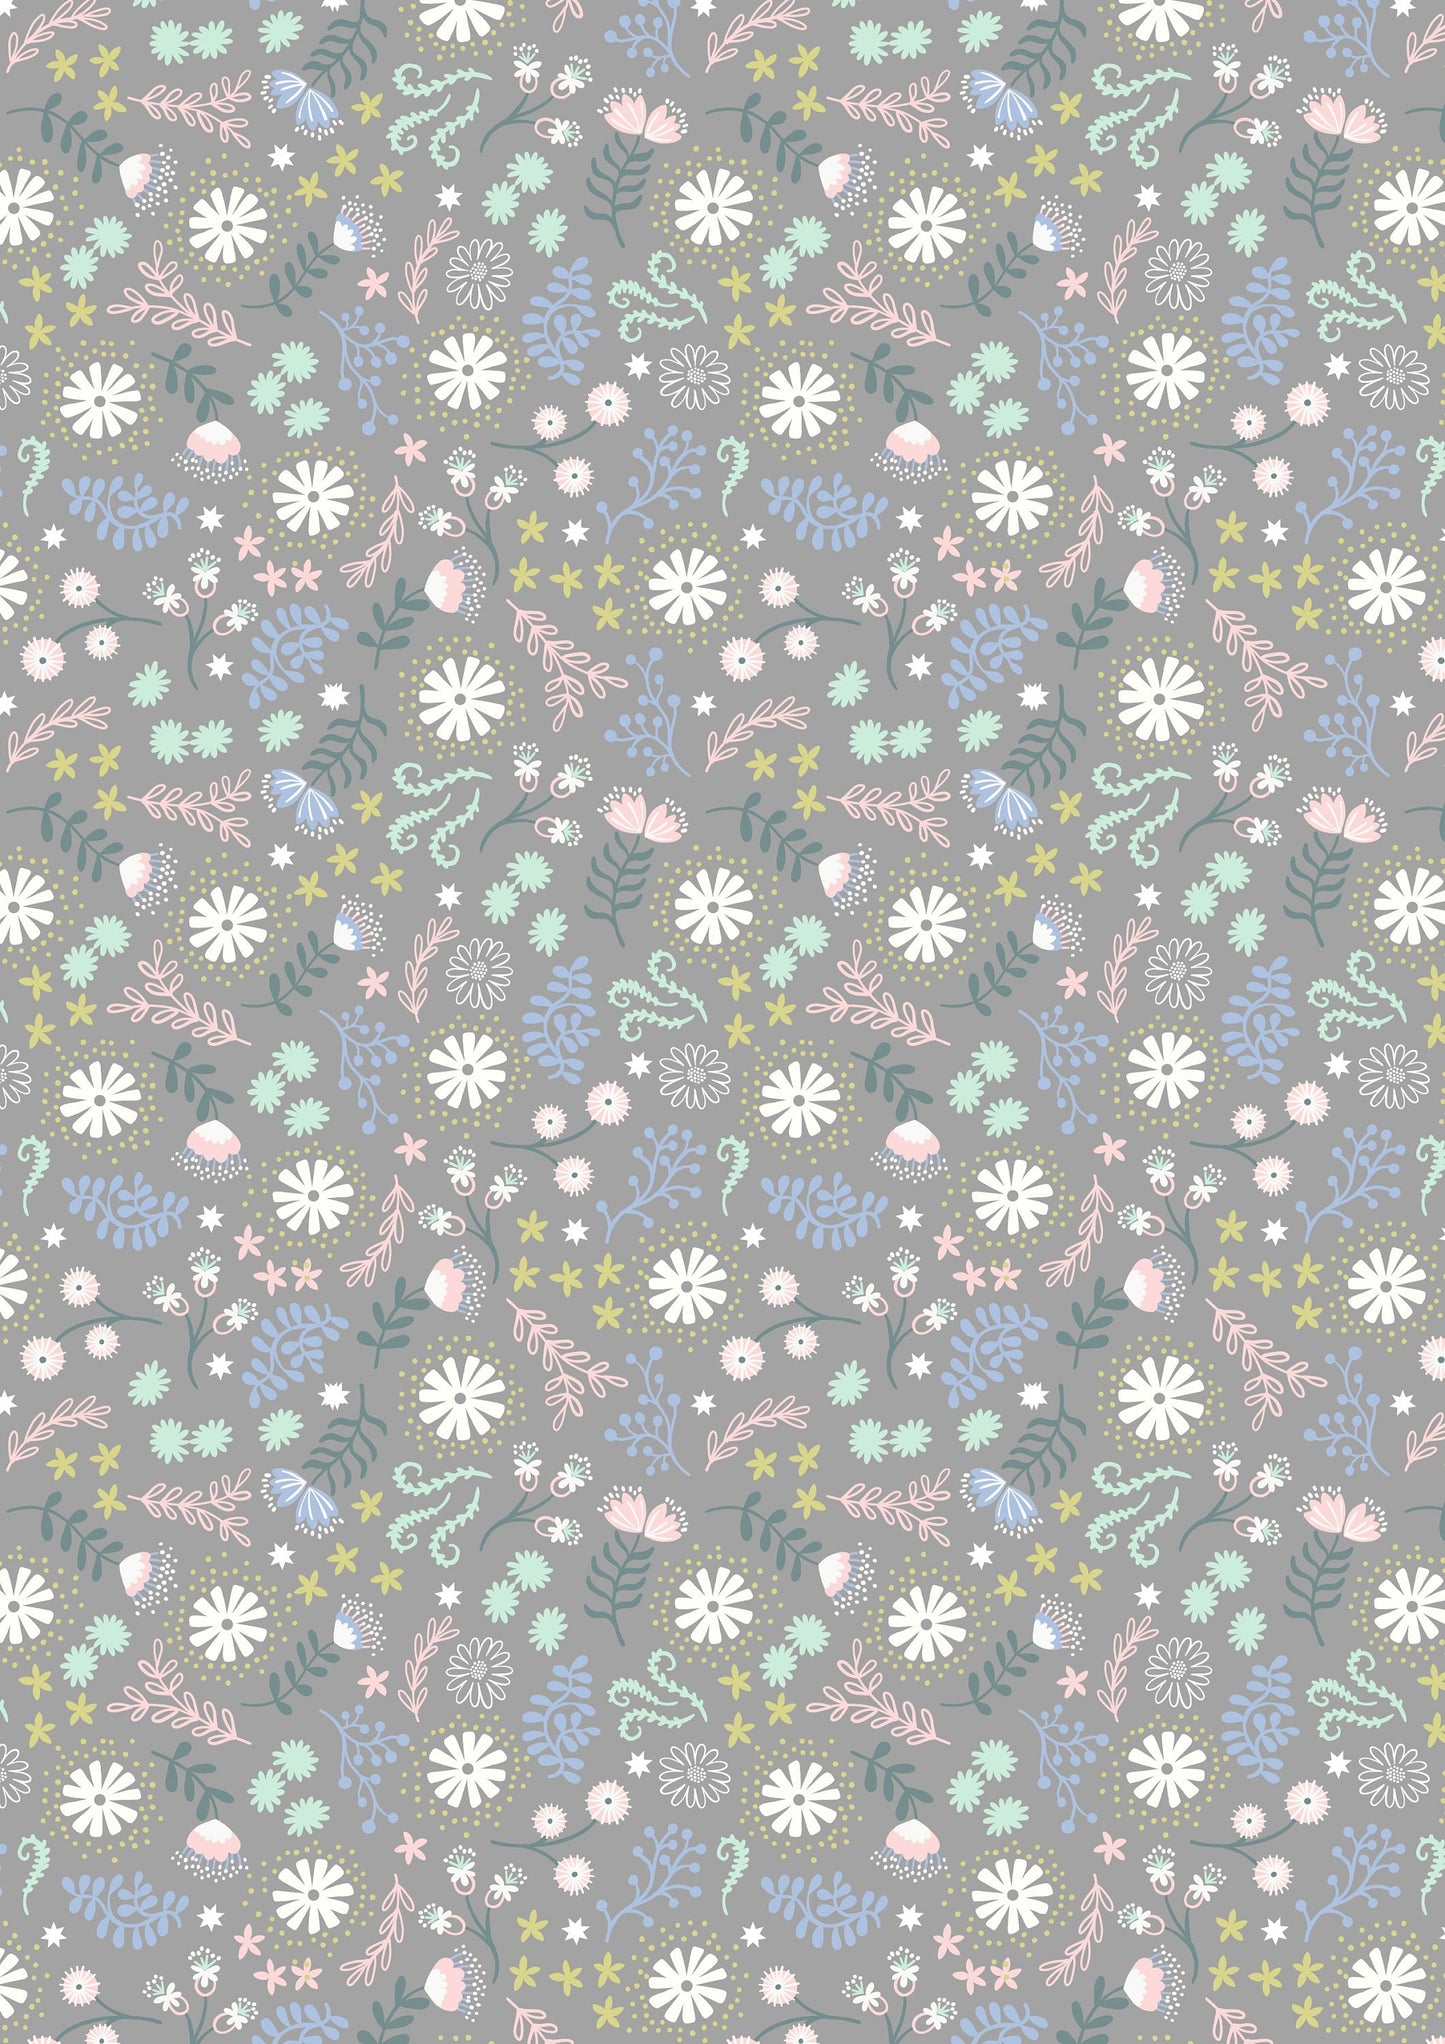 Fairy Lights Magical Flowers Gray Glow in the Dark A310.2 Cotton Woven Fabric